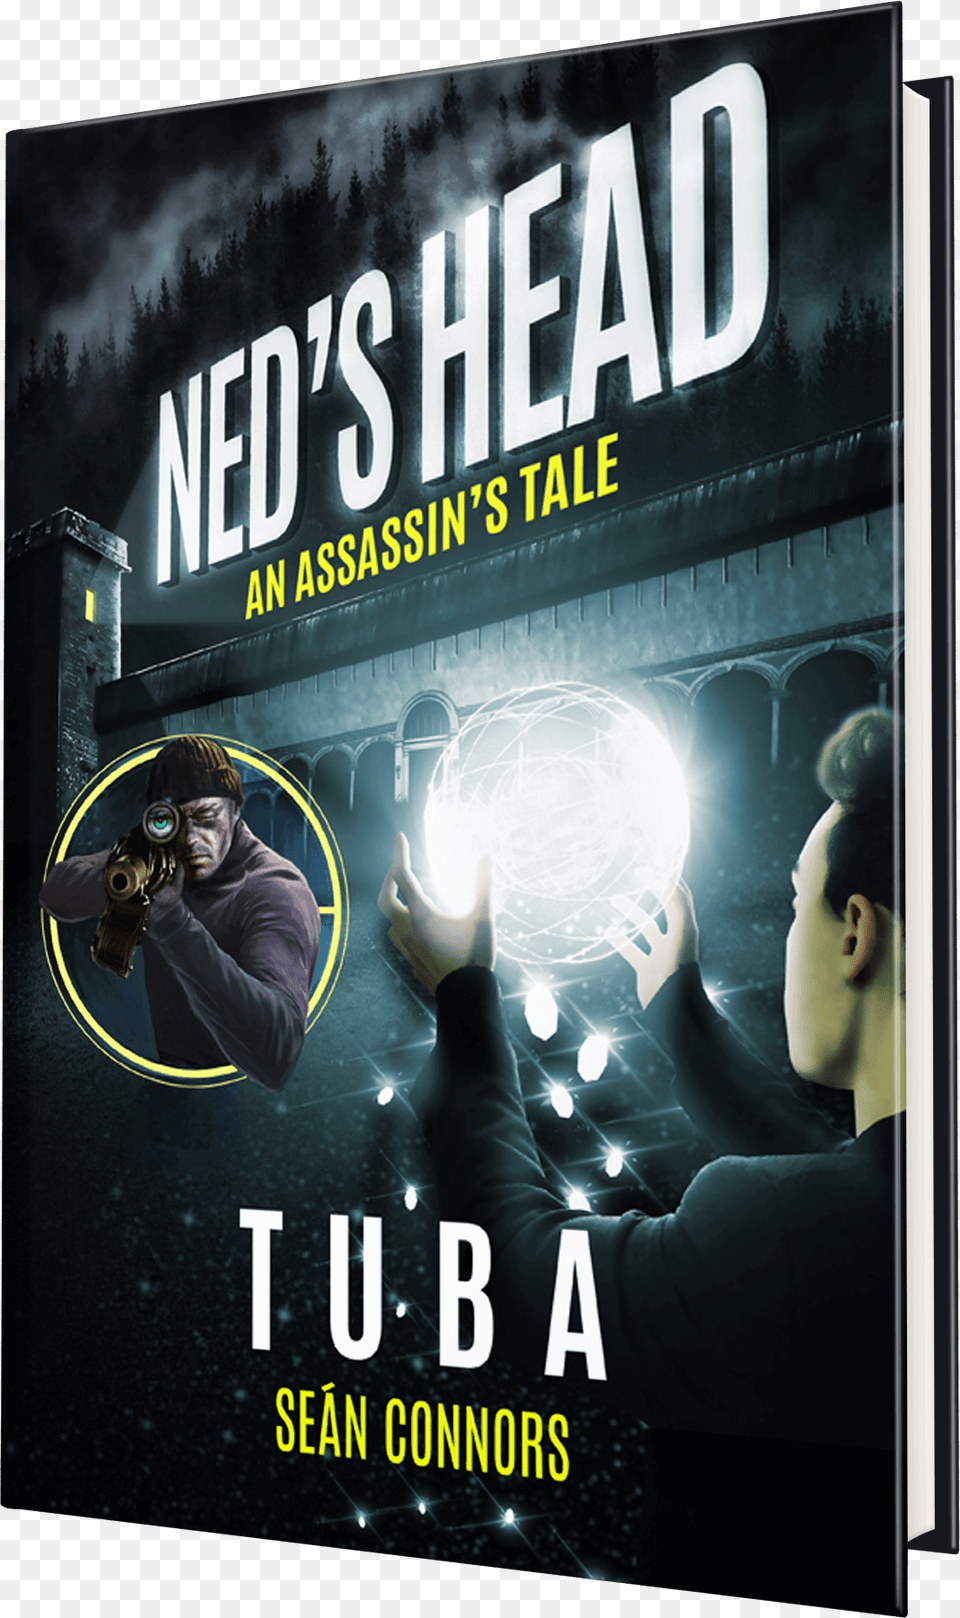 Head An Assassin39s Tale Tuba Free Ebook From Ned39s Head, Advertisement, Poster, Adult, Person Png